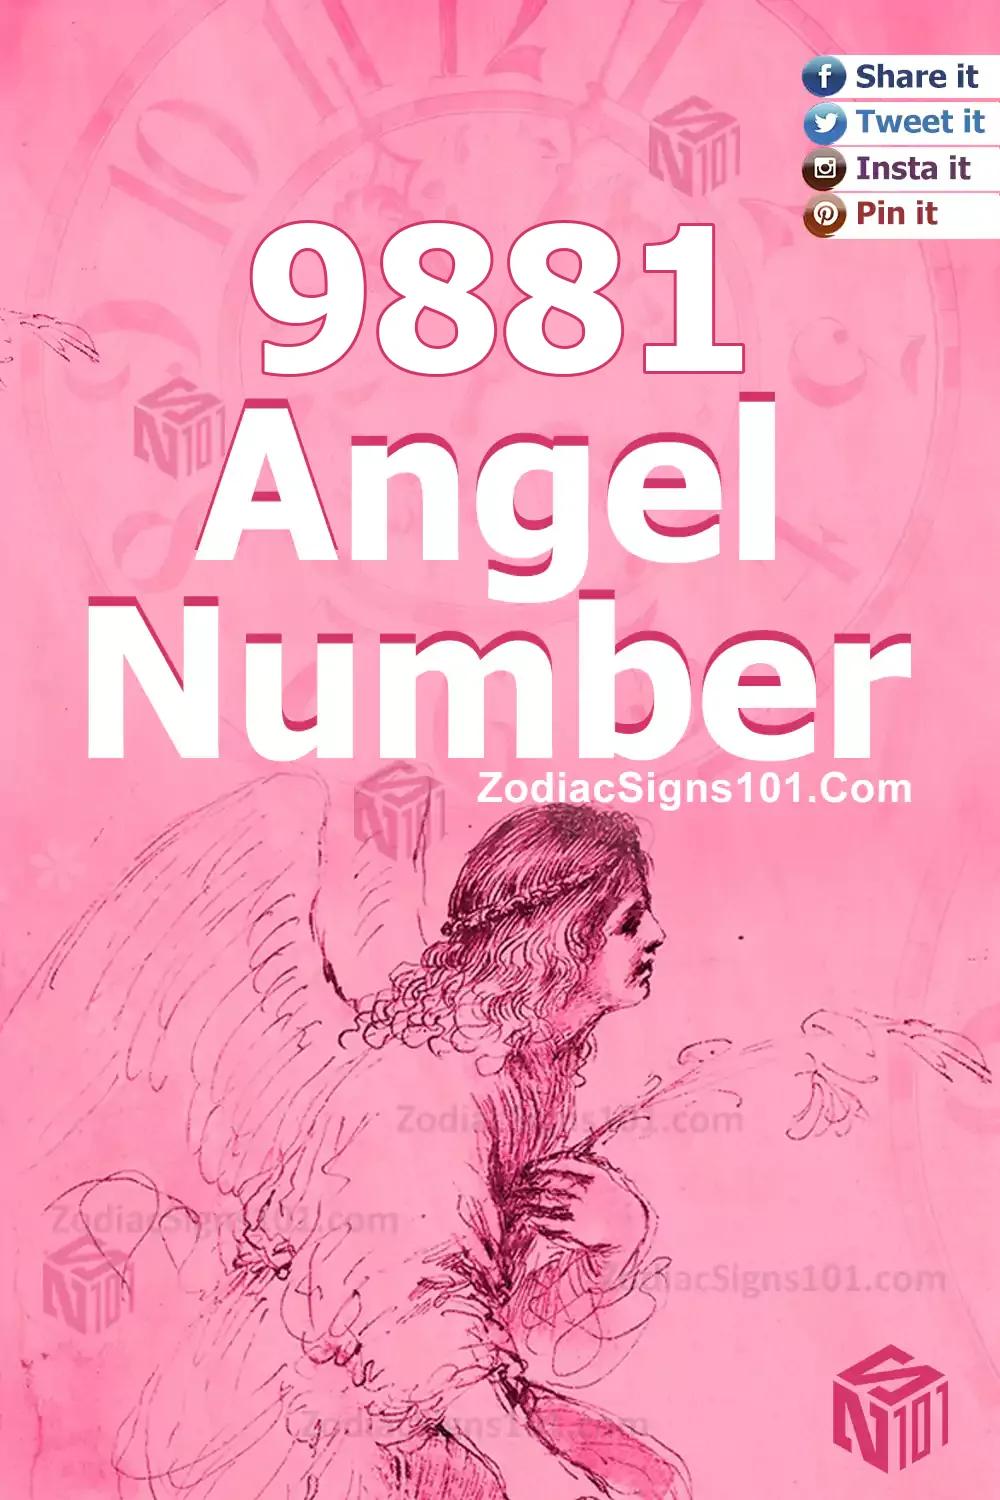 9881 Angel Number Meaning